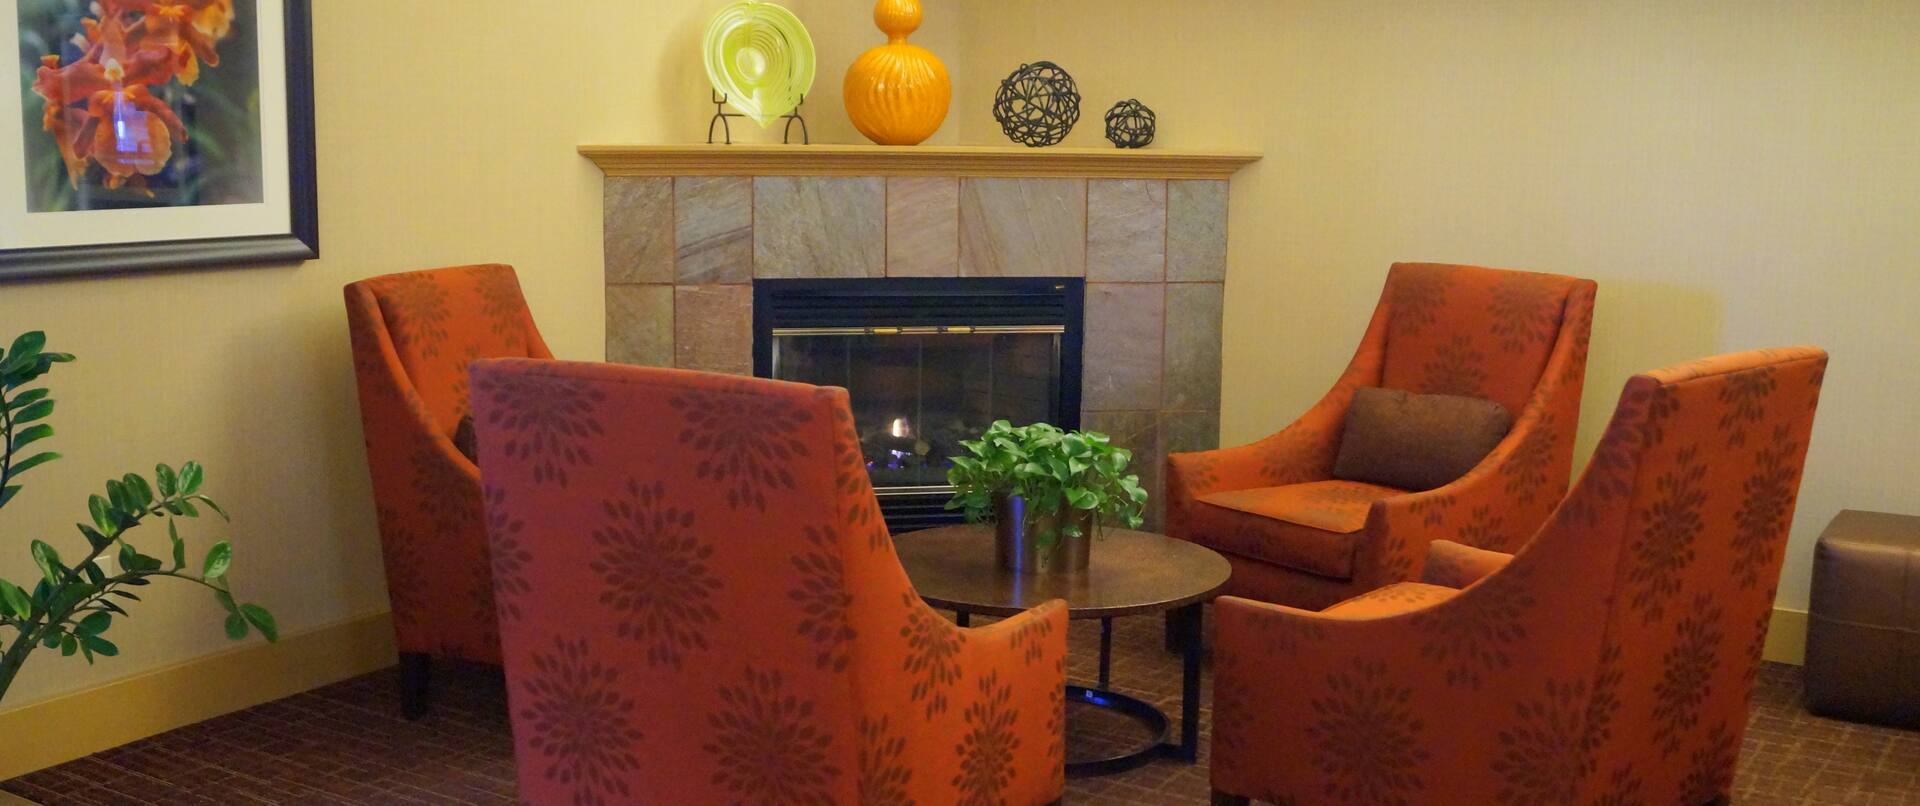 Chairs and Fireplace in Lobby